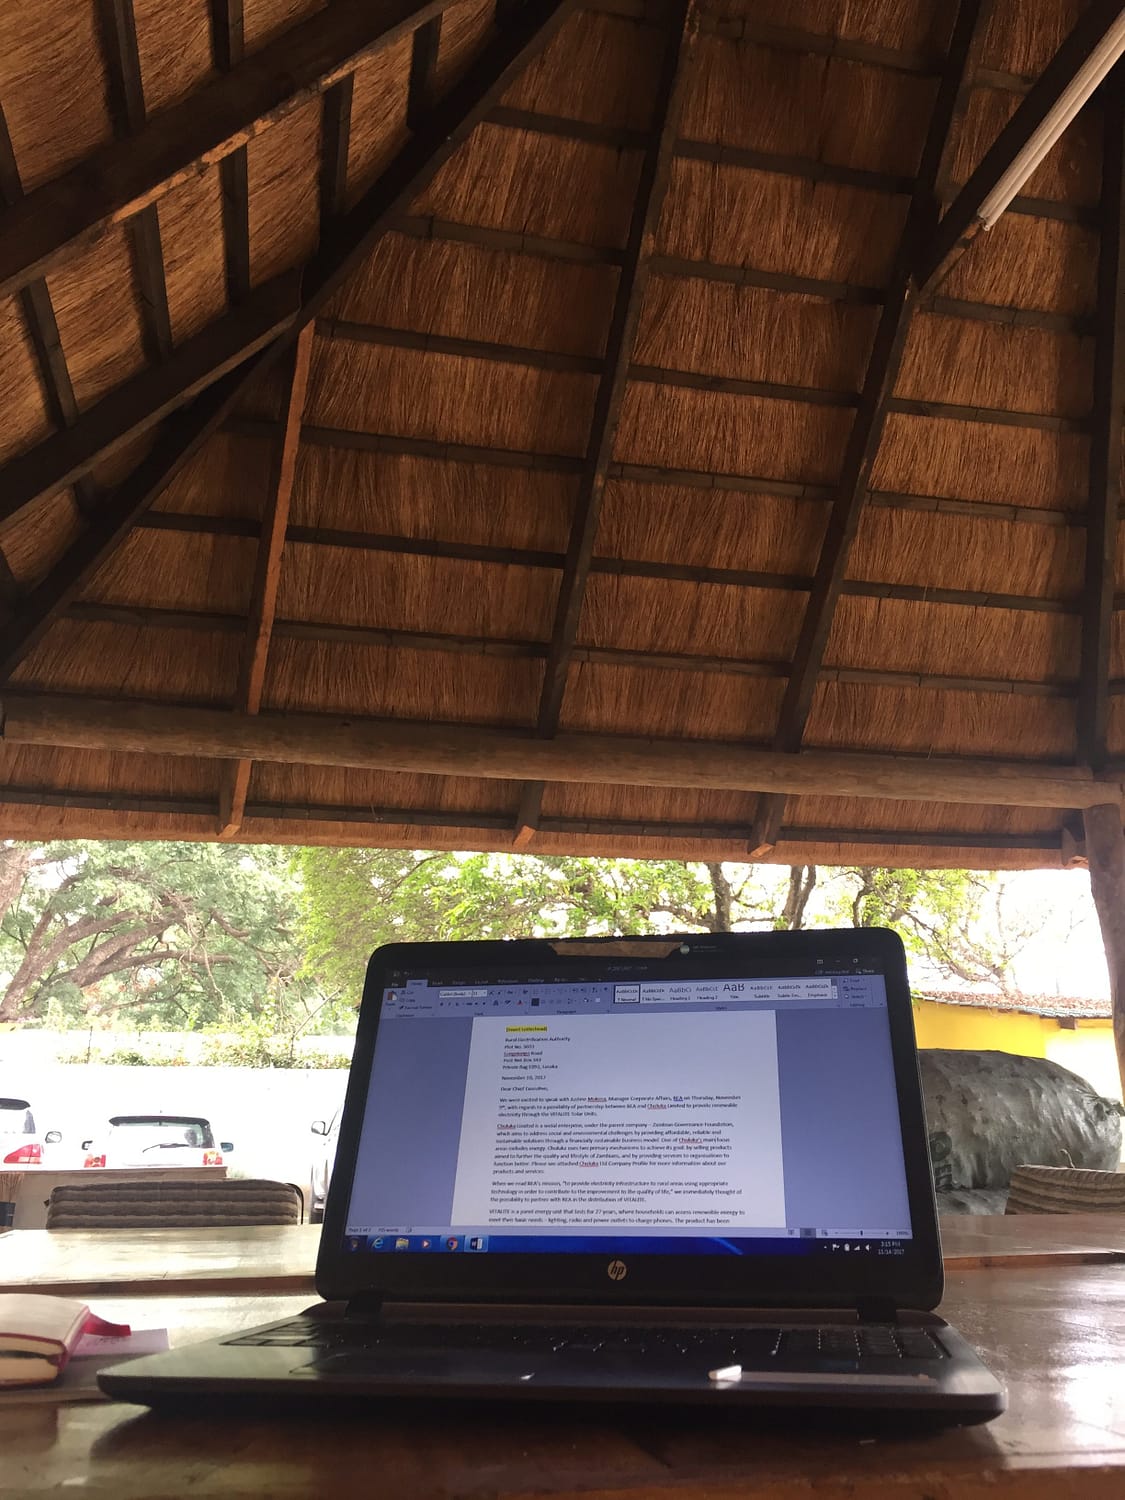 Sometimes in the afternoon, Ankita went outside and worked in a hut (even though they had fantastic offices). It reminded her of having class outdoors in primary school.